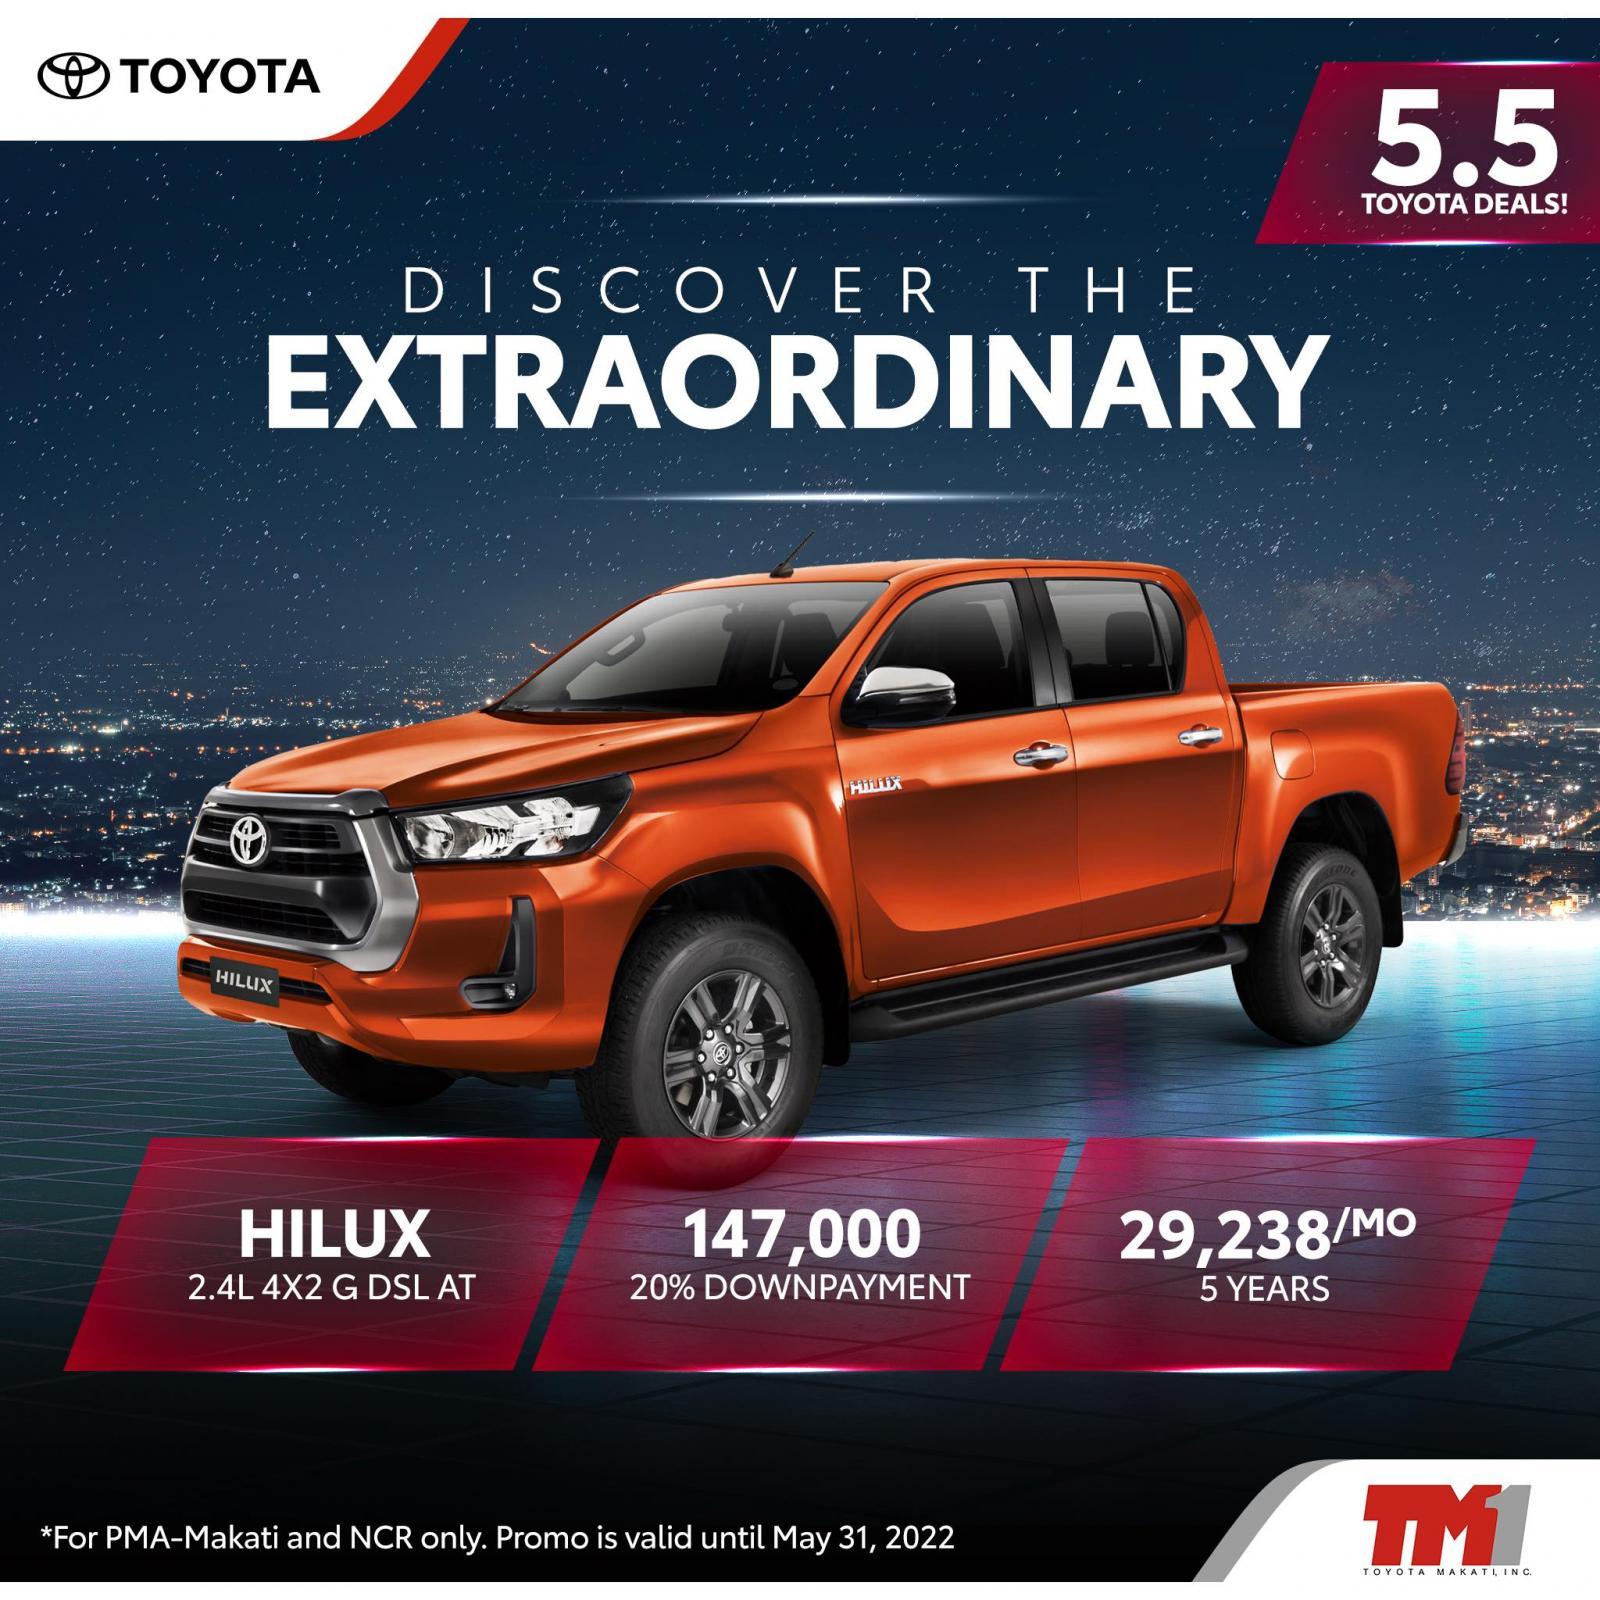 Toyota Hilux 2.4L 4X2 G DSL AT With ₱147,000 All-in Down payment